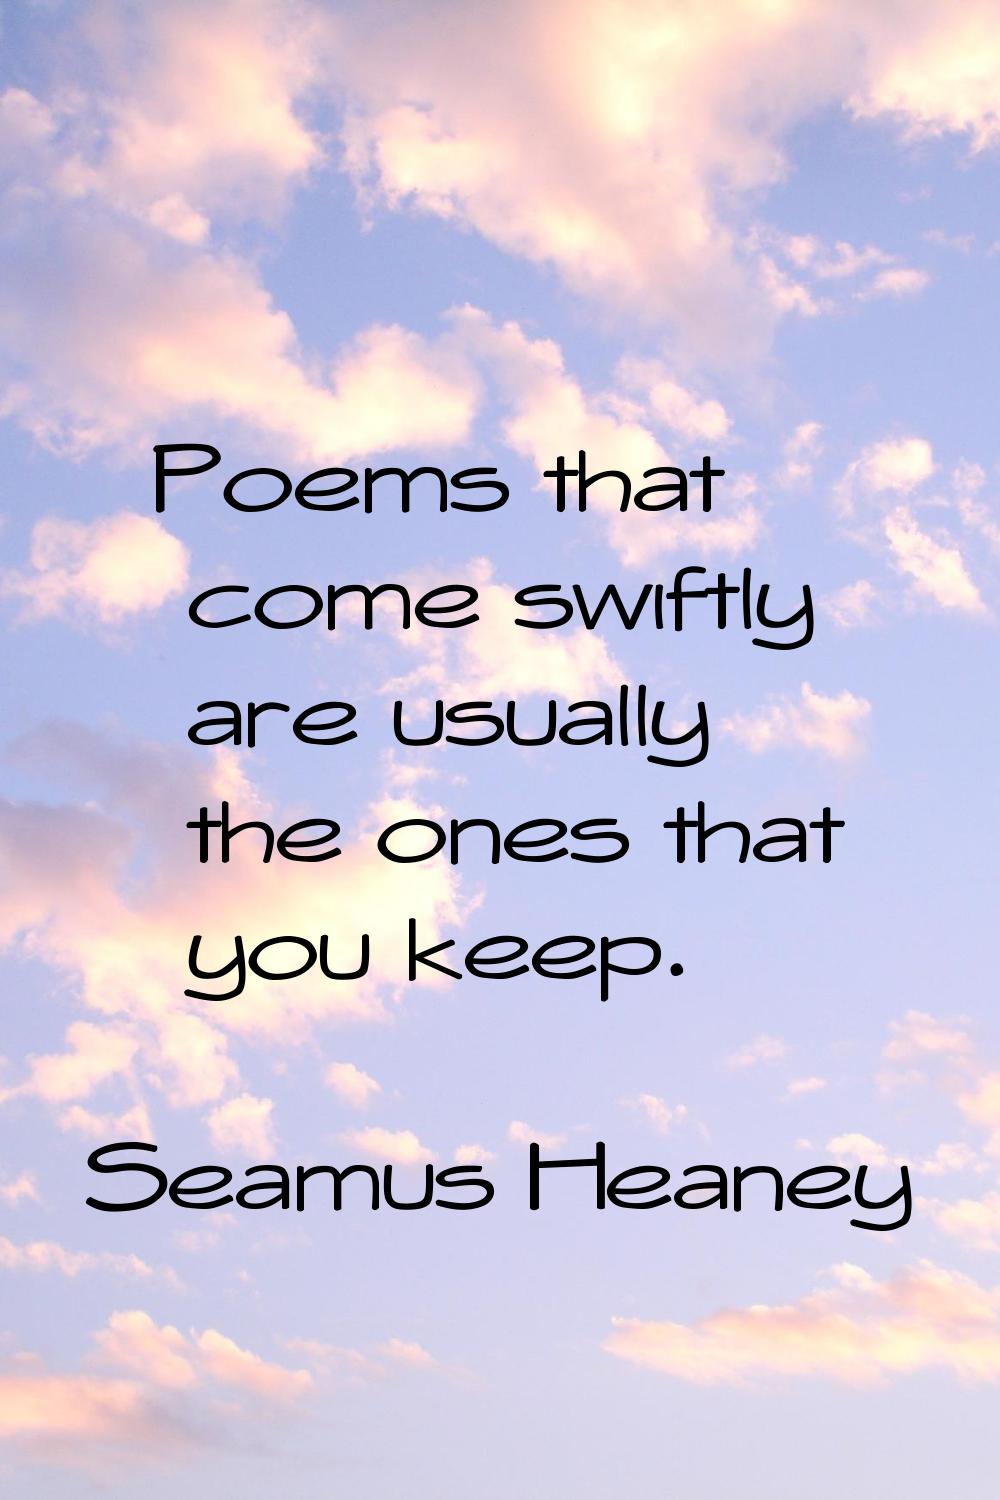 Poems that come swiftly are usually the ones that you keep.